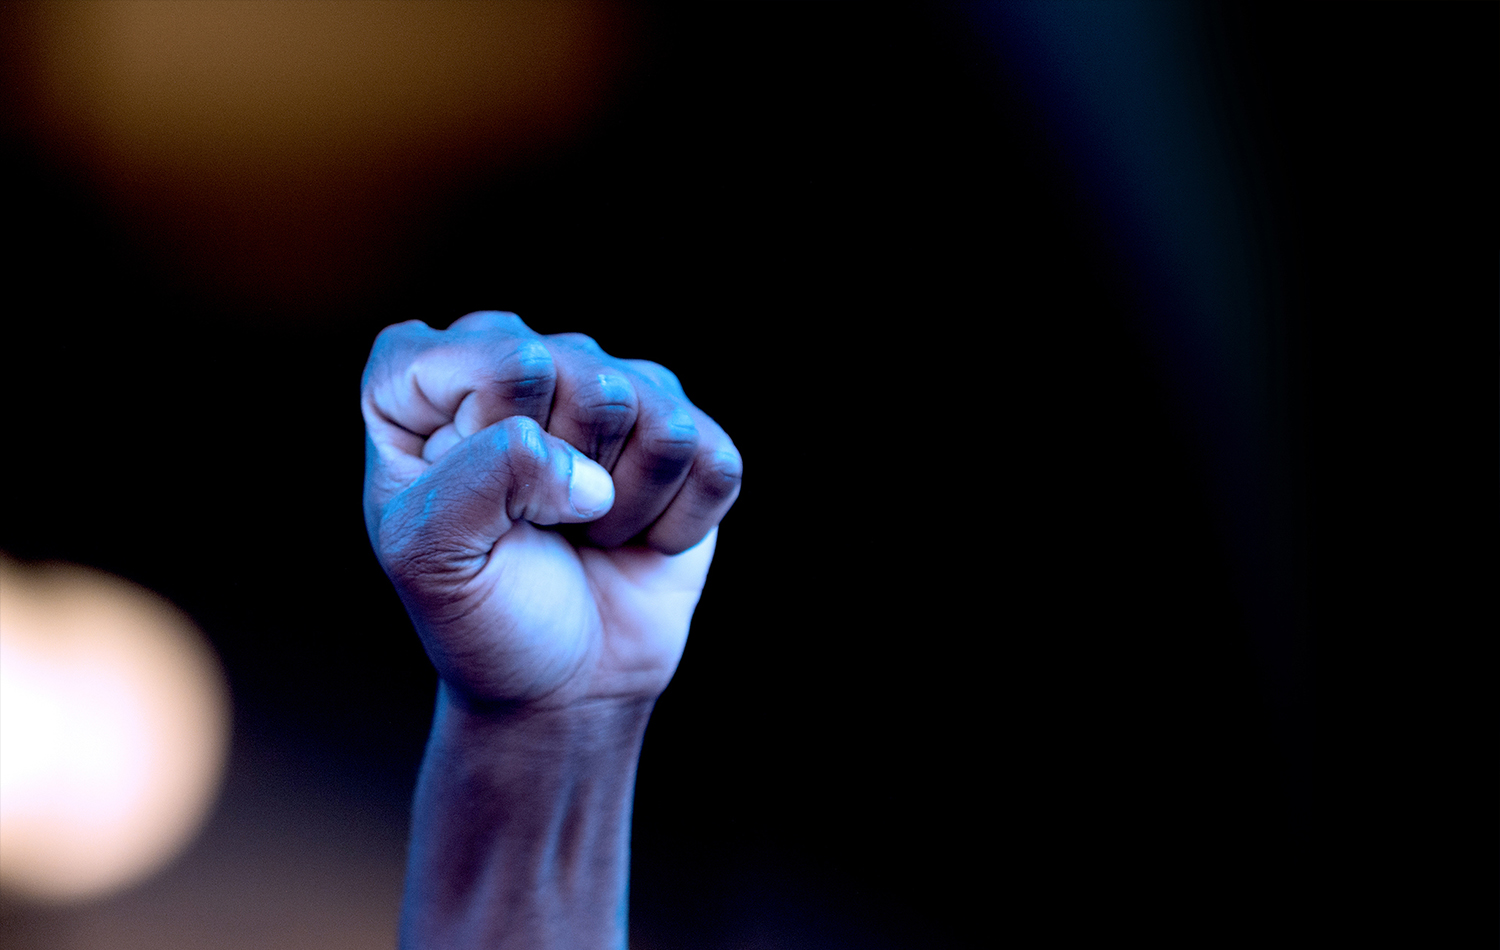 Protester fist in the air against a dark background